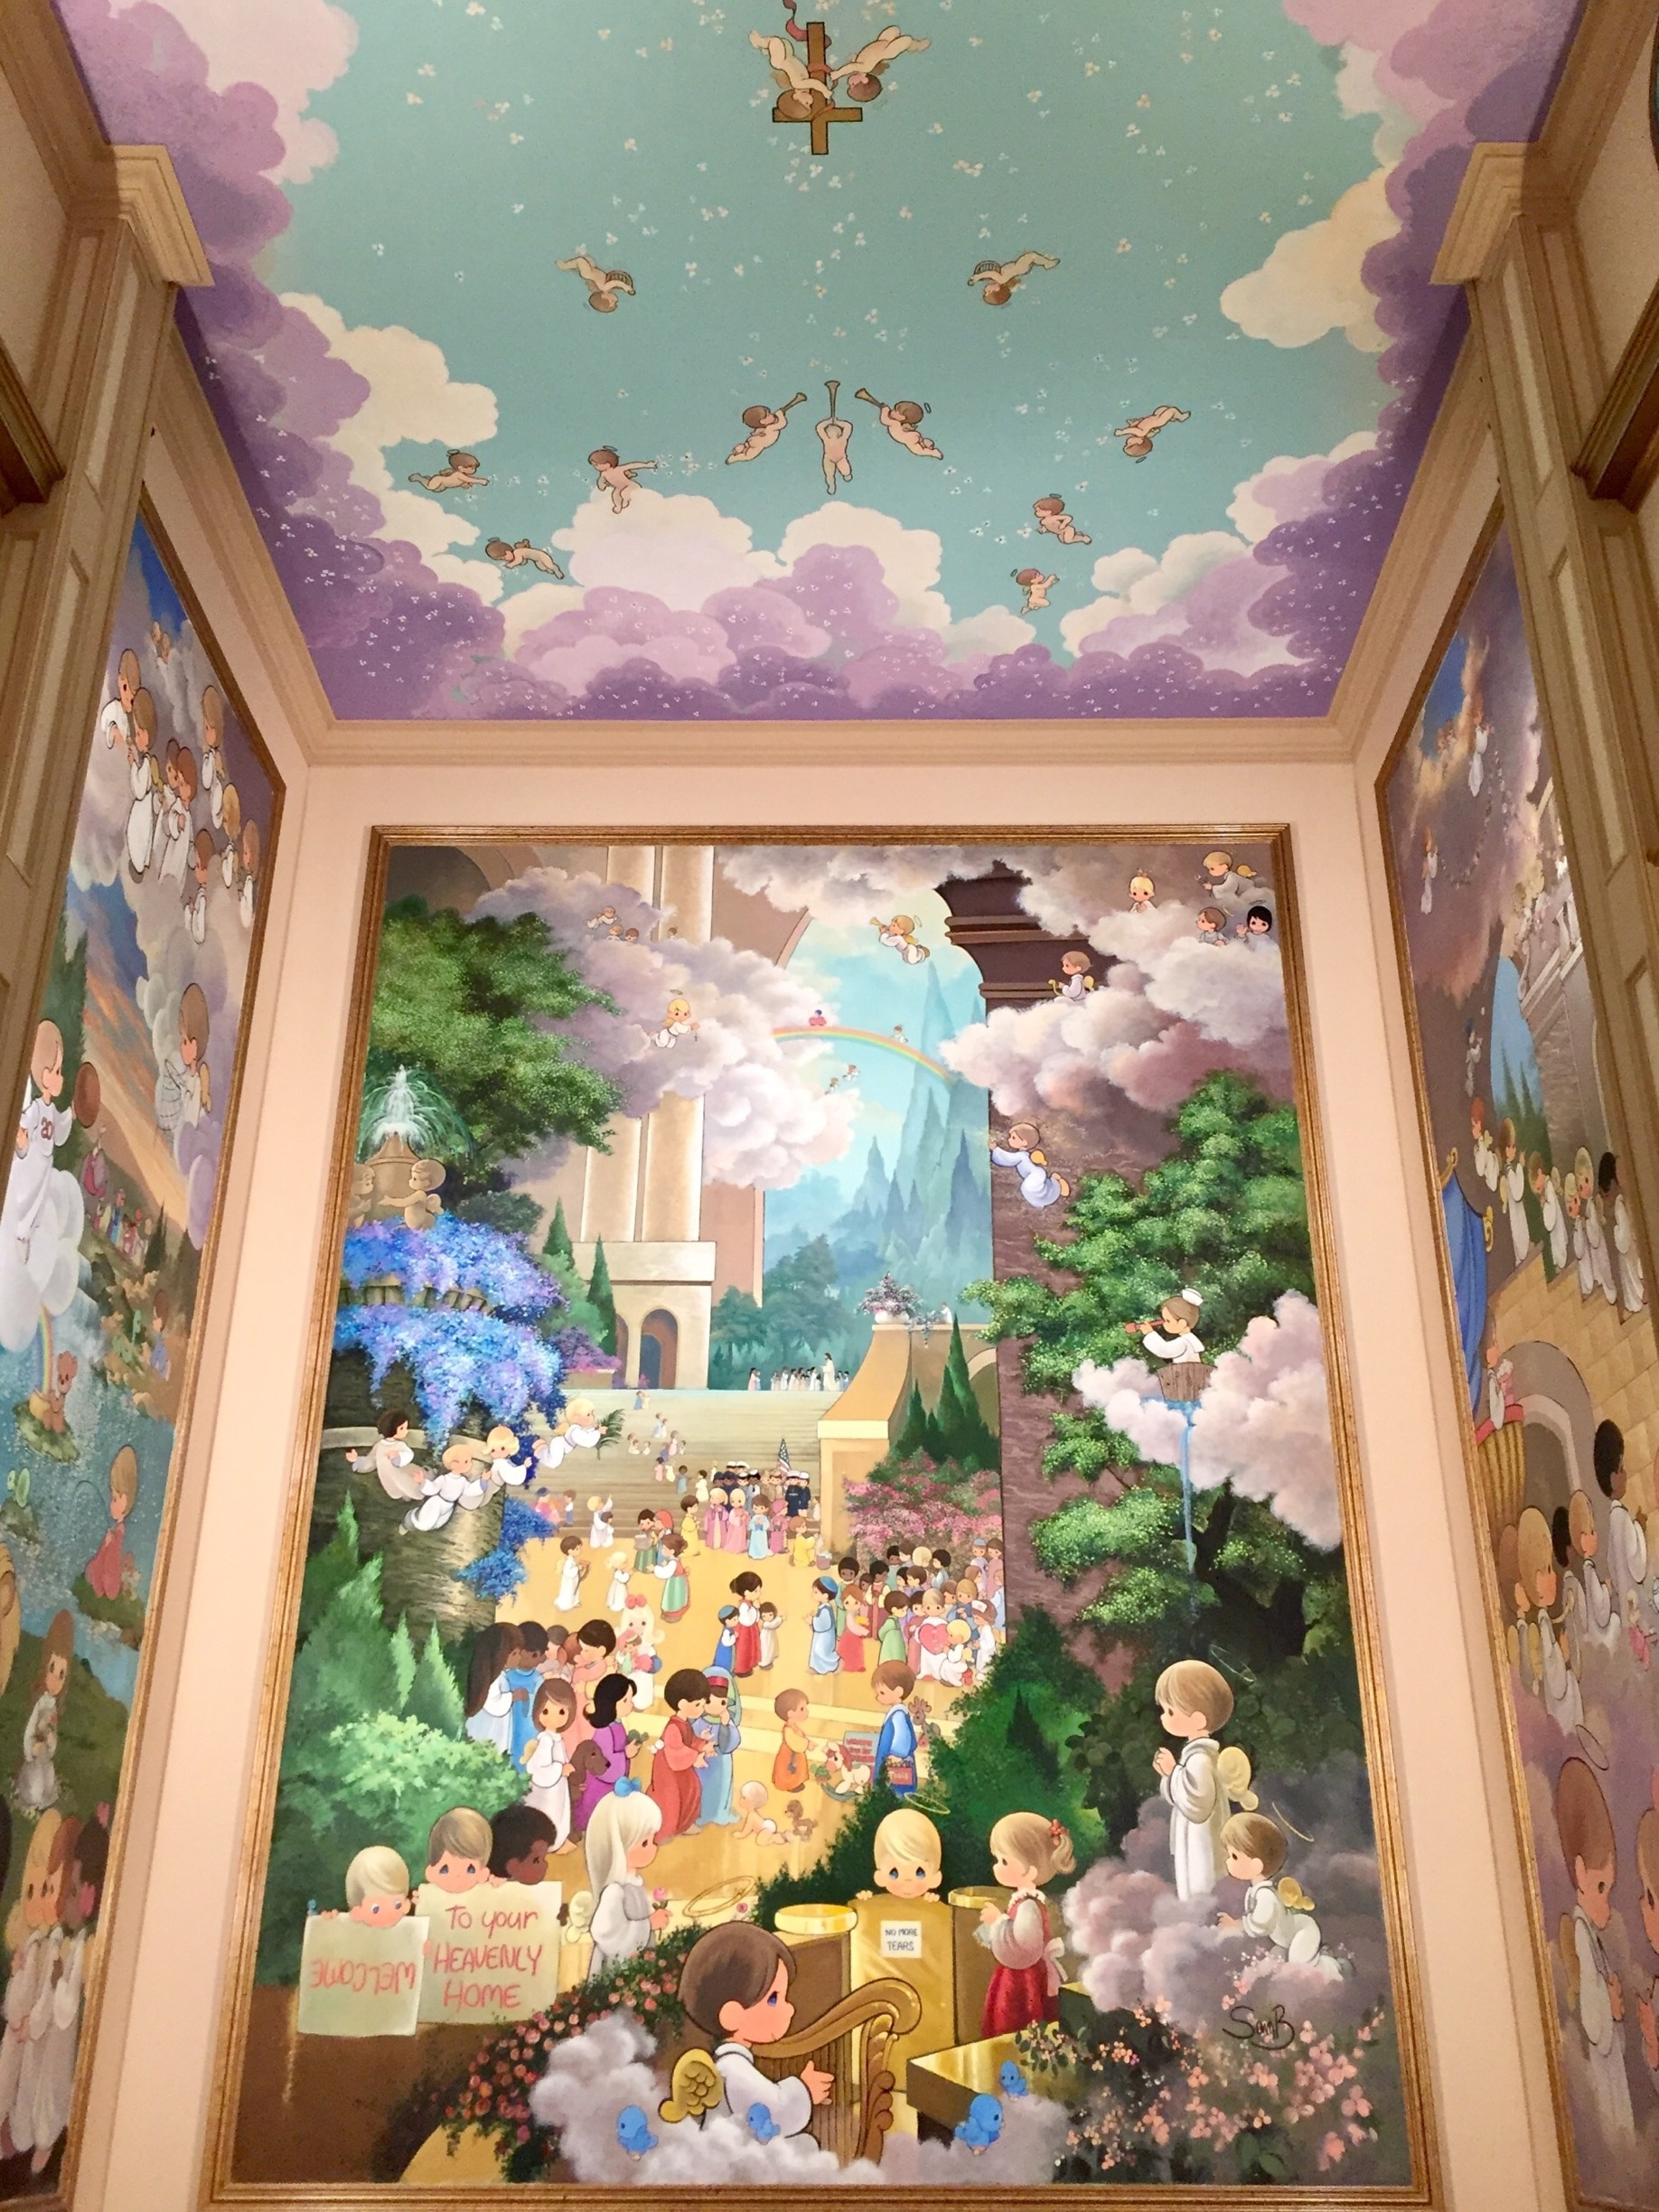 Chapel created and painted by the artist who is responsible for the Precious Moments figurines. It is meant to be a space for contemplative thought and peace. 